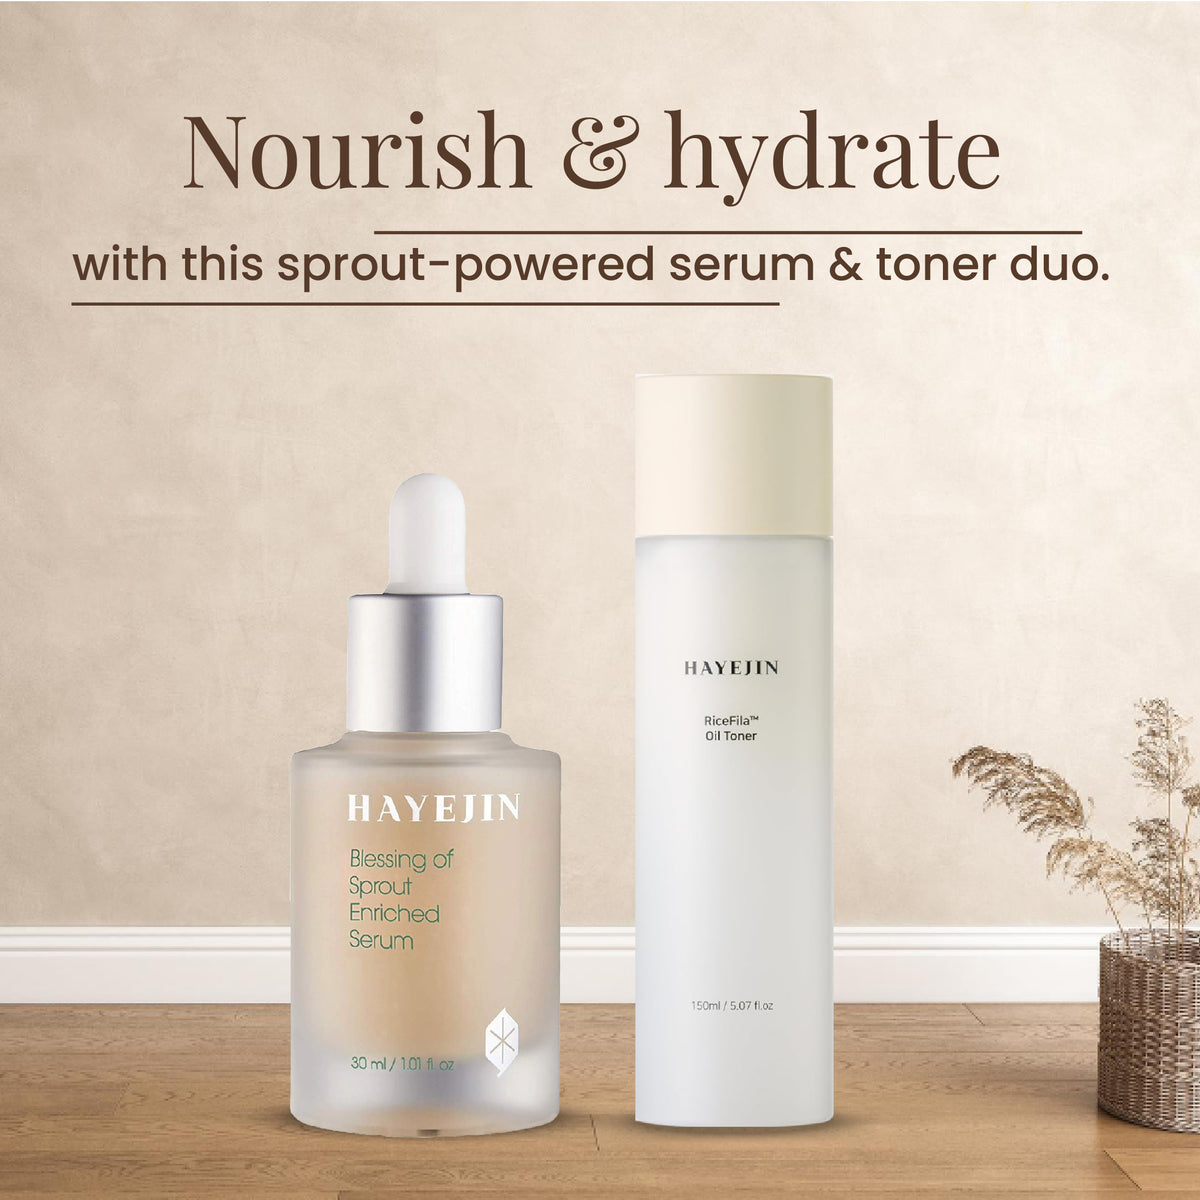 Hayejin Blessing of Sprout Enriched Serum 30 ml and Hayejin RiceFila Oil Toner 150 ml Combo